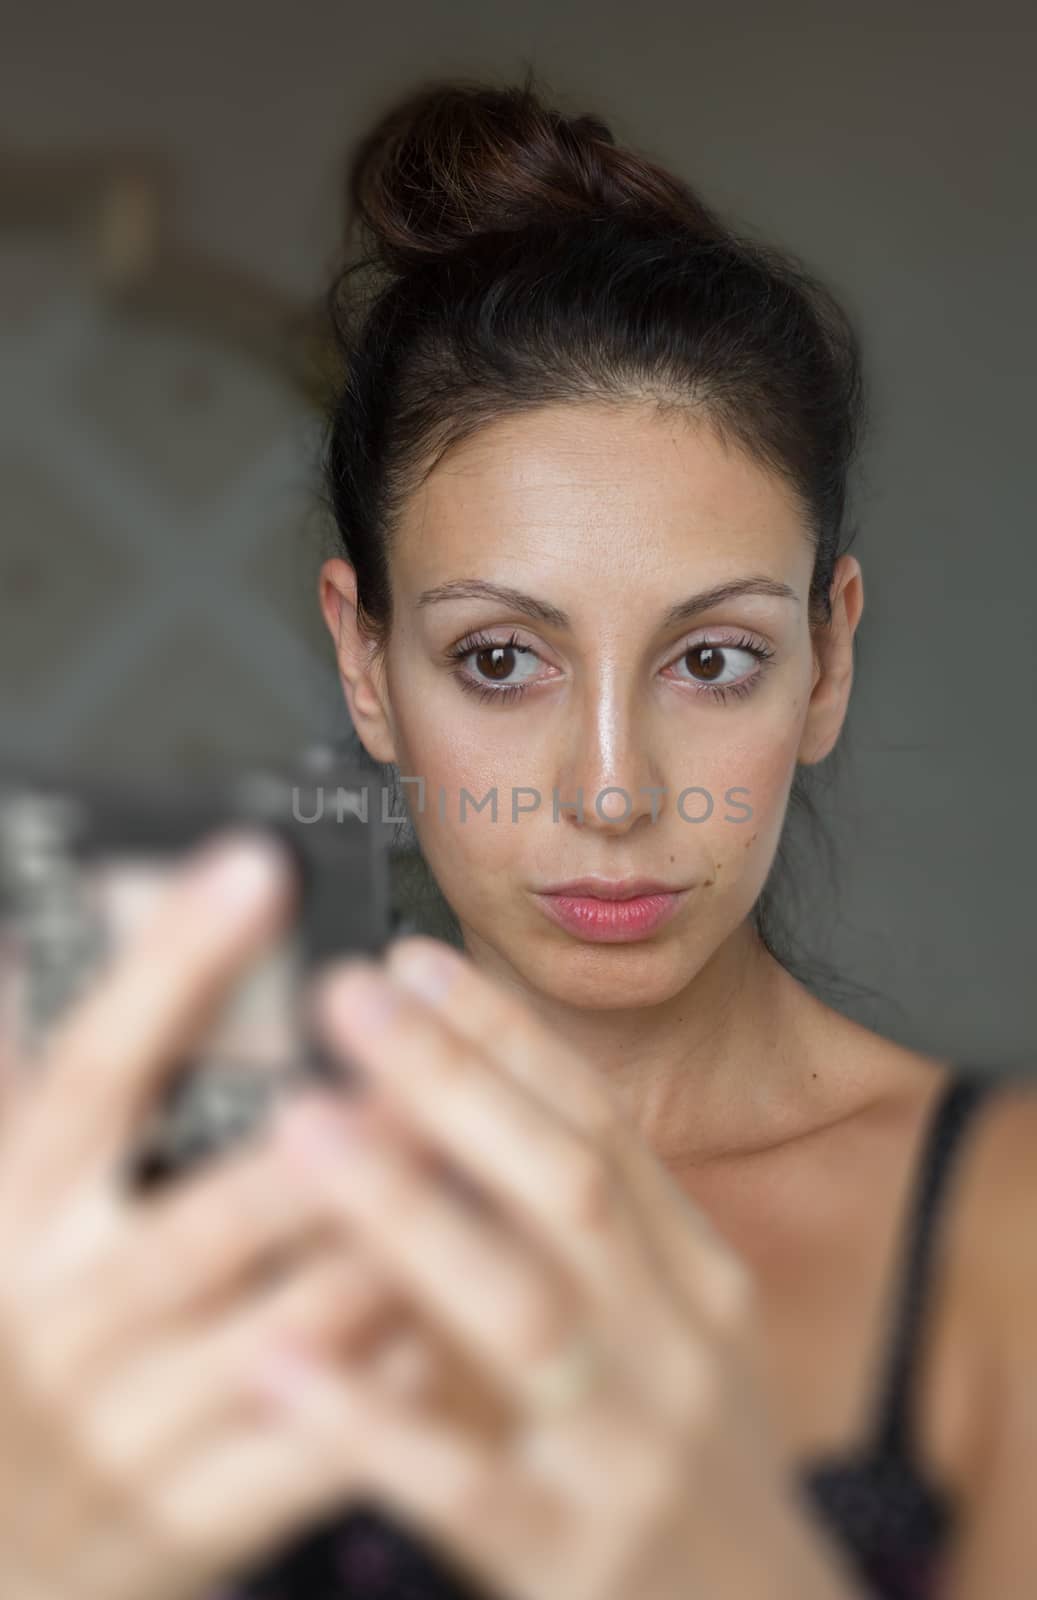 Brunette woman caucasian looking at herself in the mirror. The hands are blurred. Ideal for concepts.